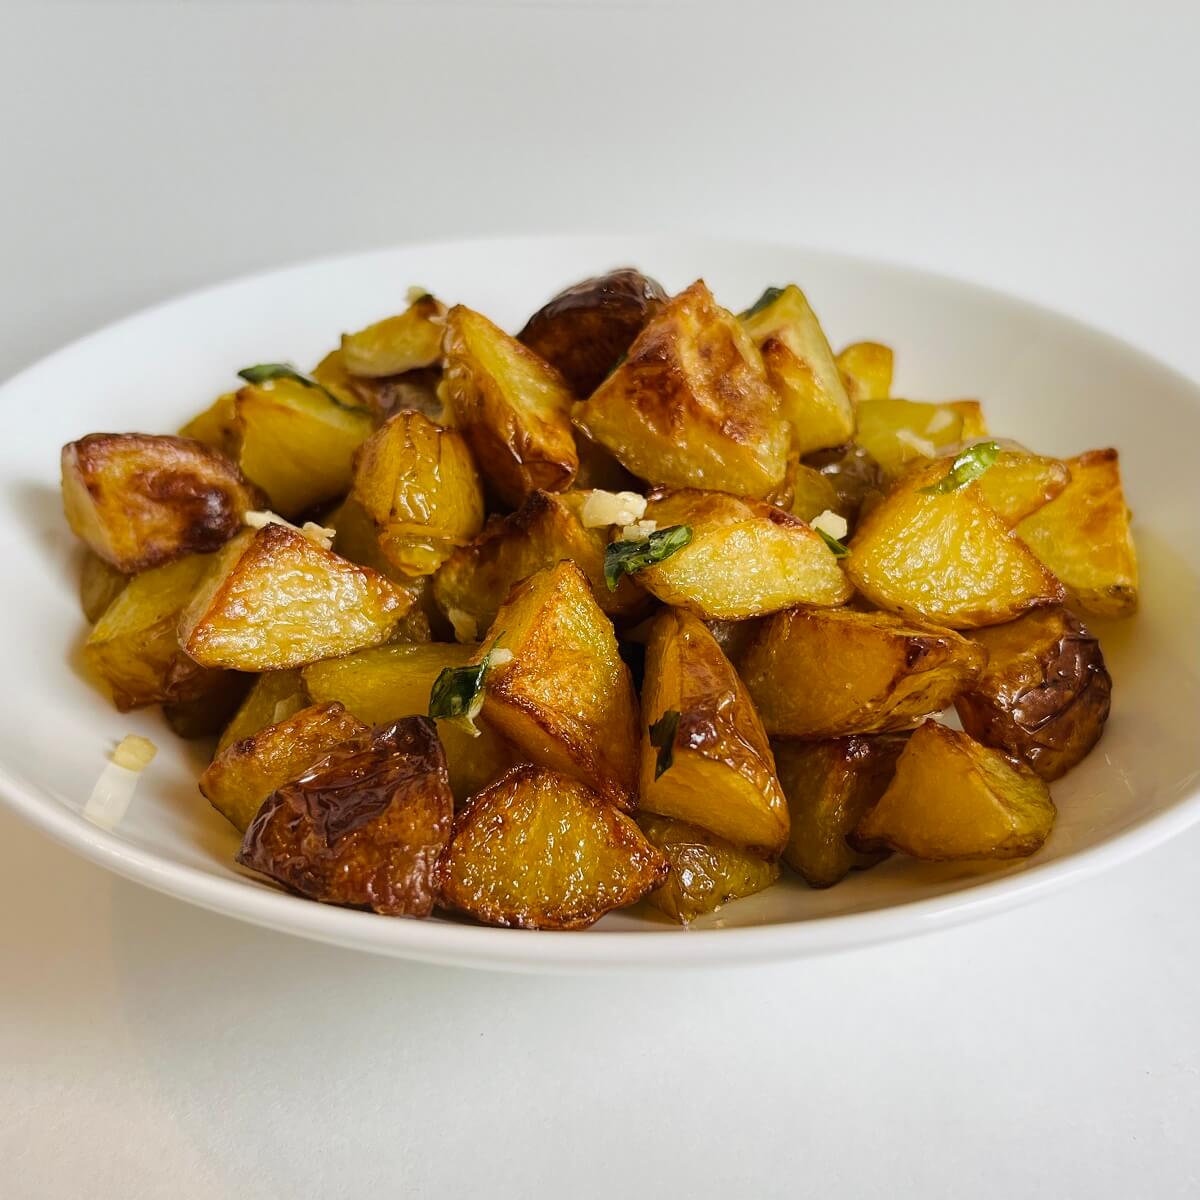 A bowl full of roasted potatoes.